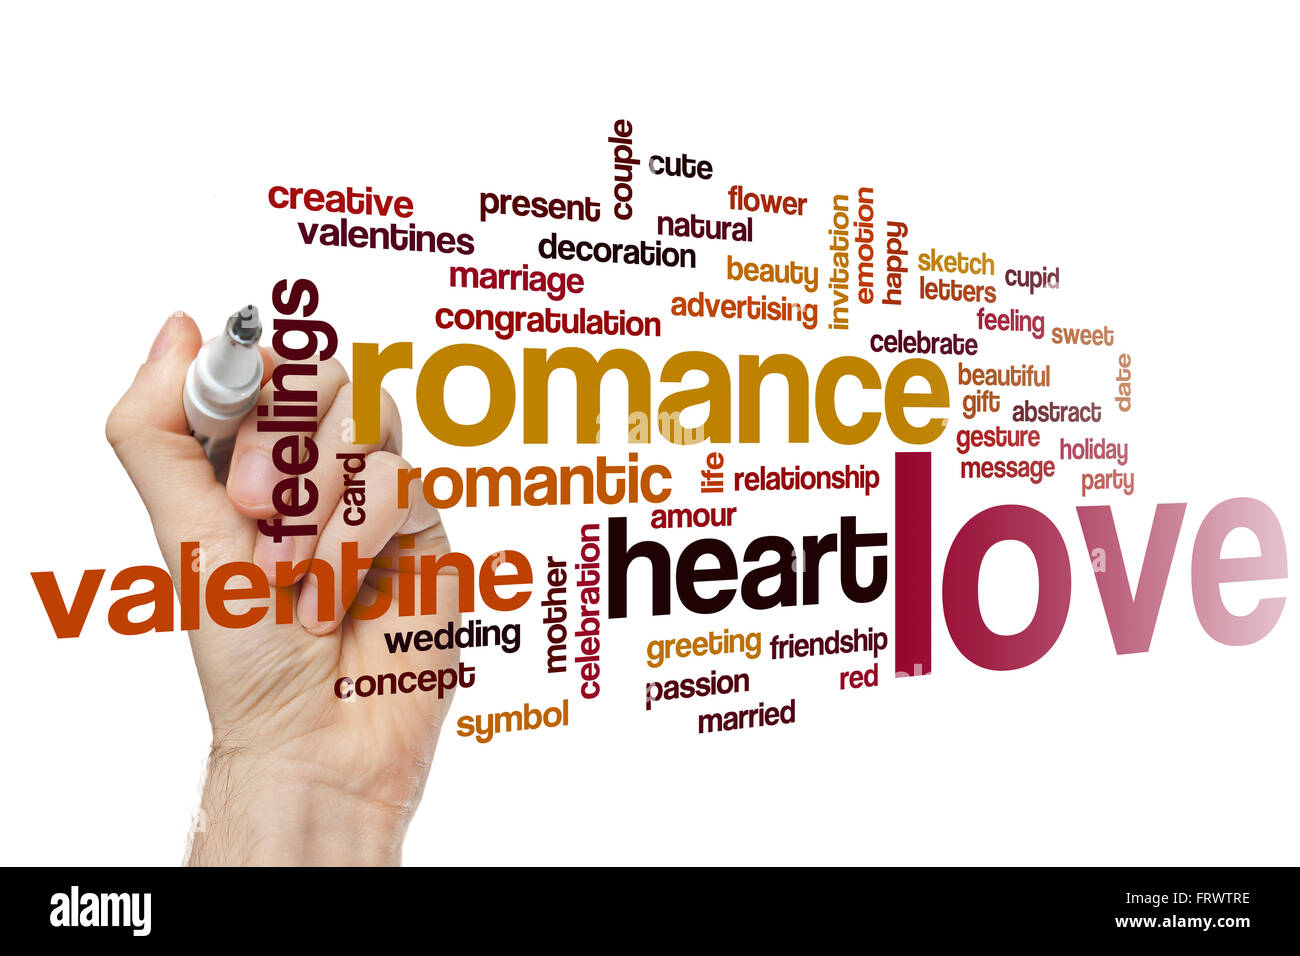 Love concept word cloud background Stock Photo